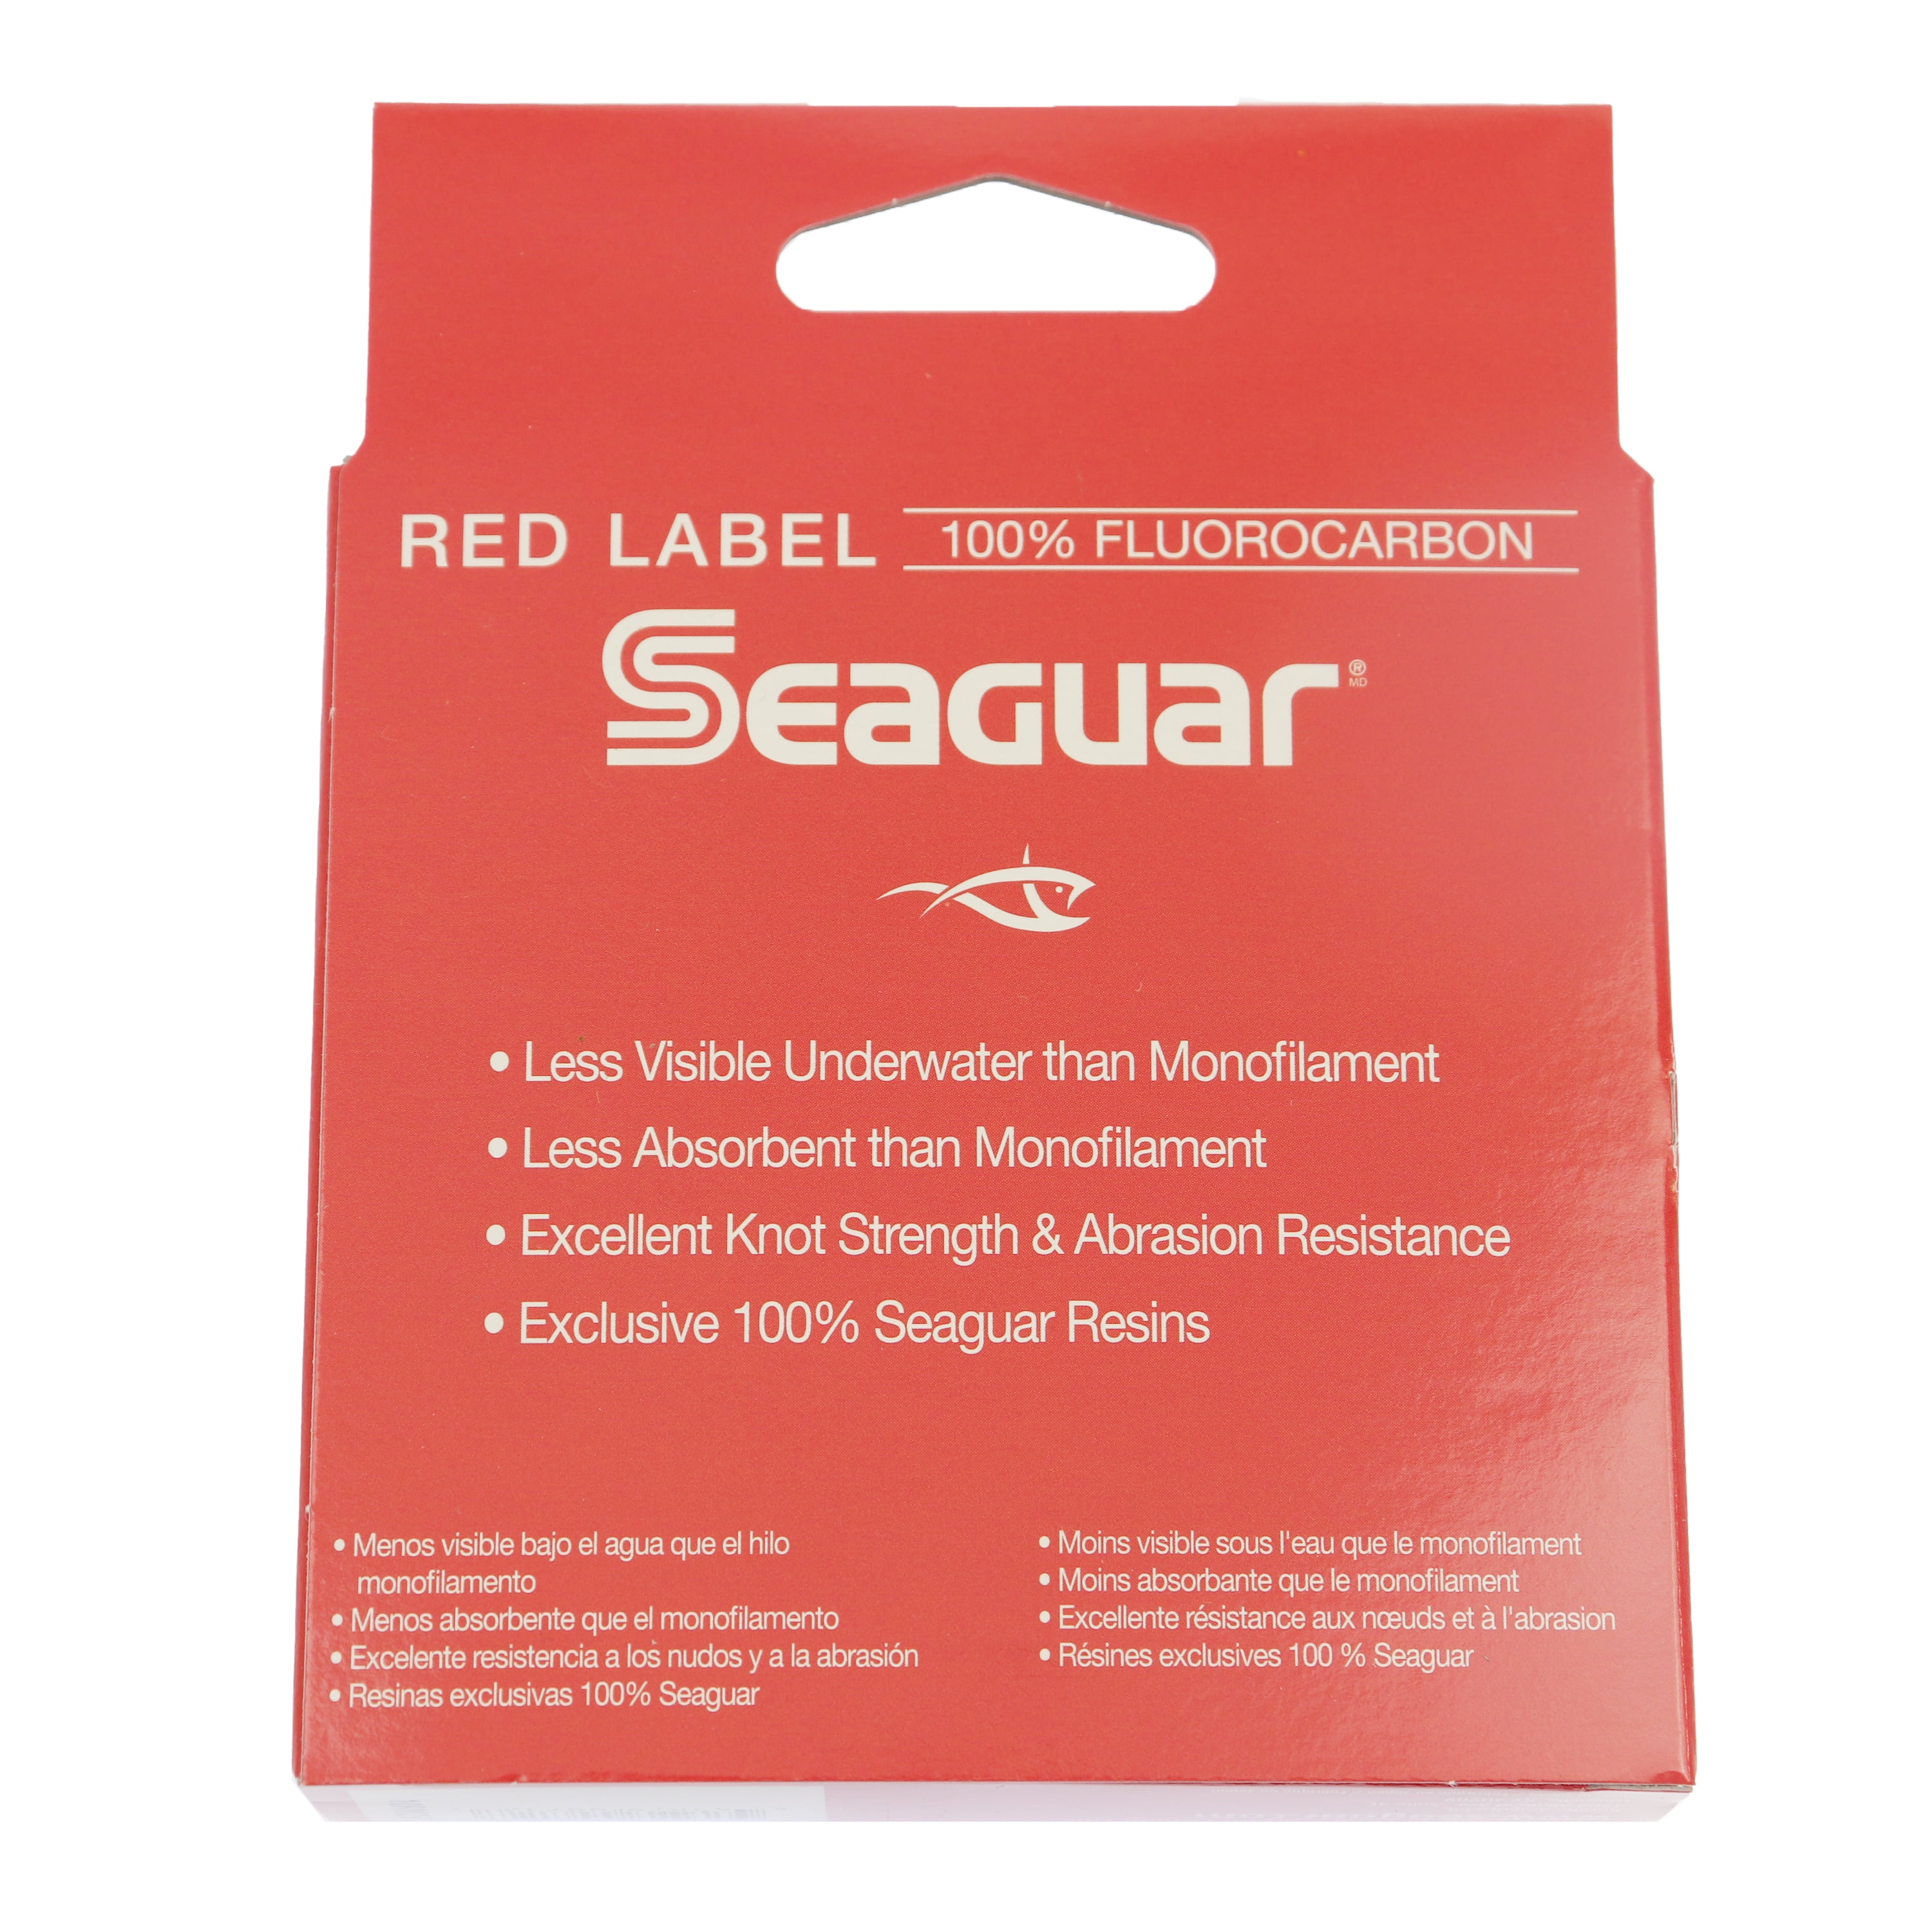 Seaguar Red Label 100% Fluorocarbon Fishing Line 10lbs, 200yds Break  Strength/Length - 10RM250 